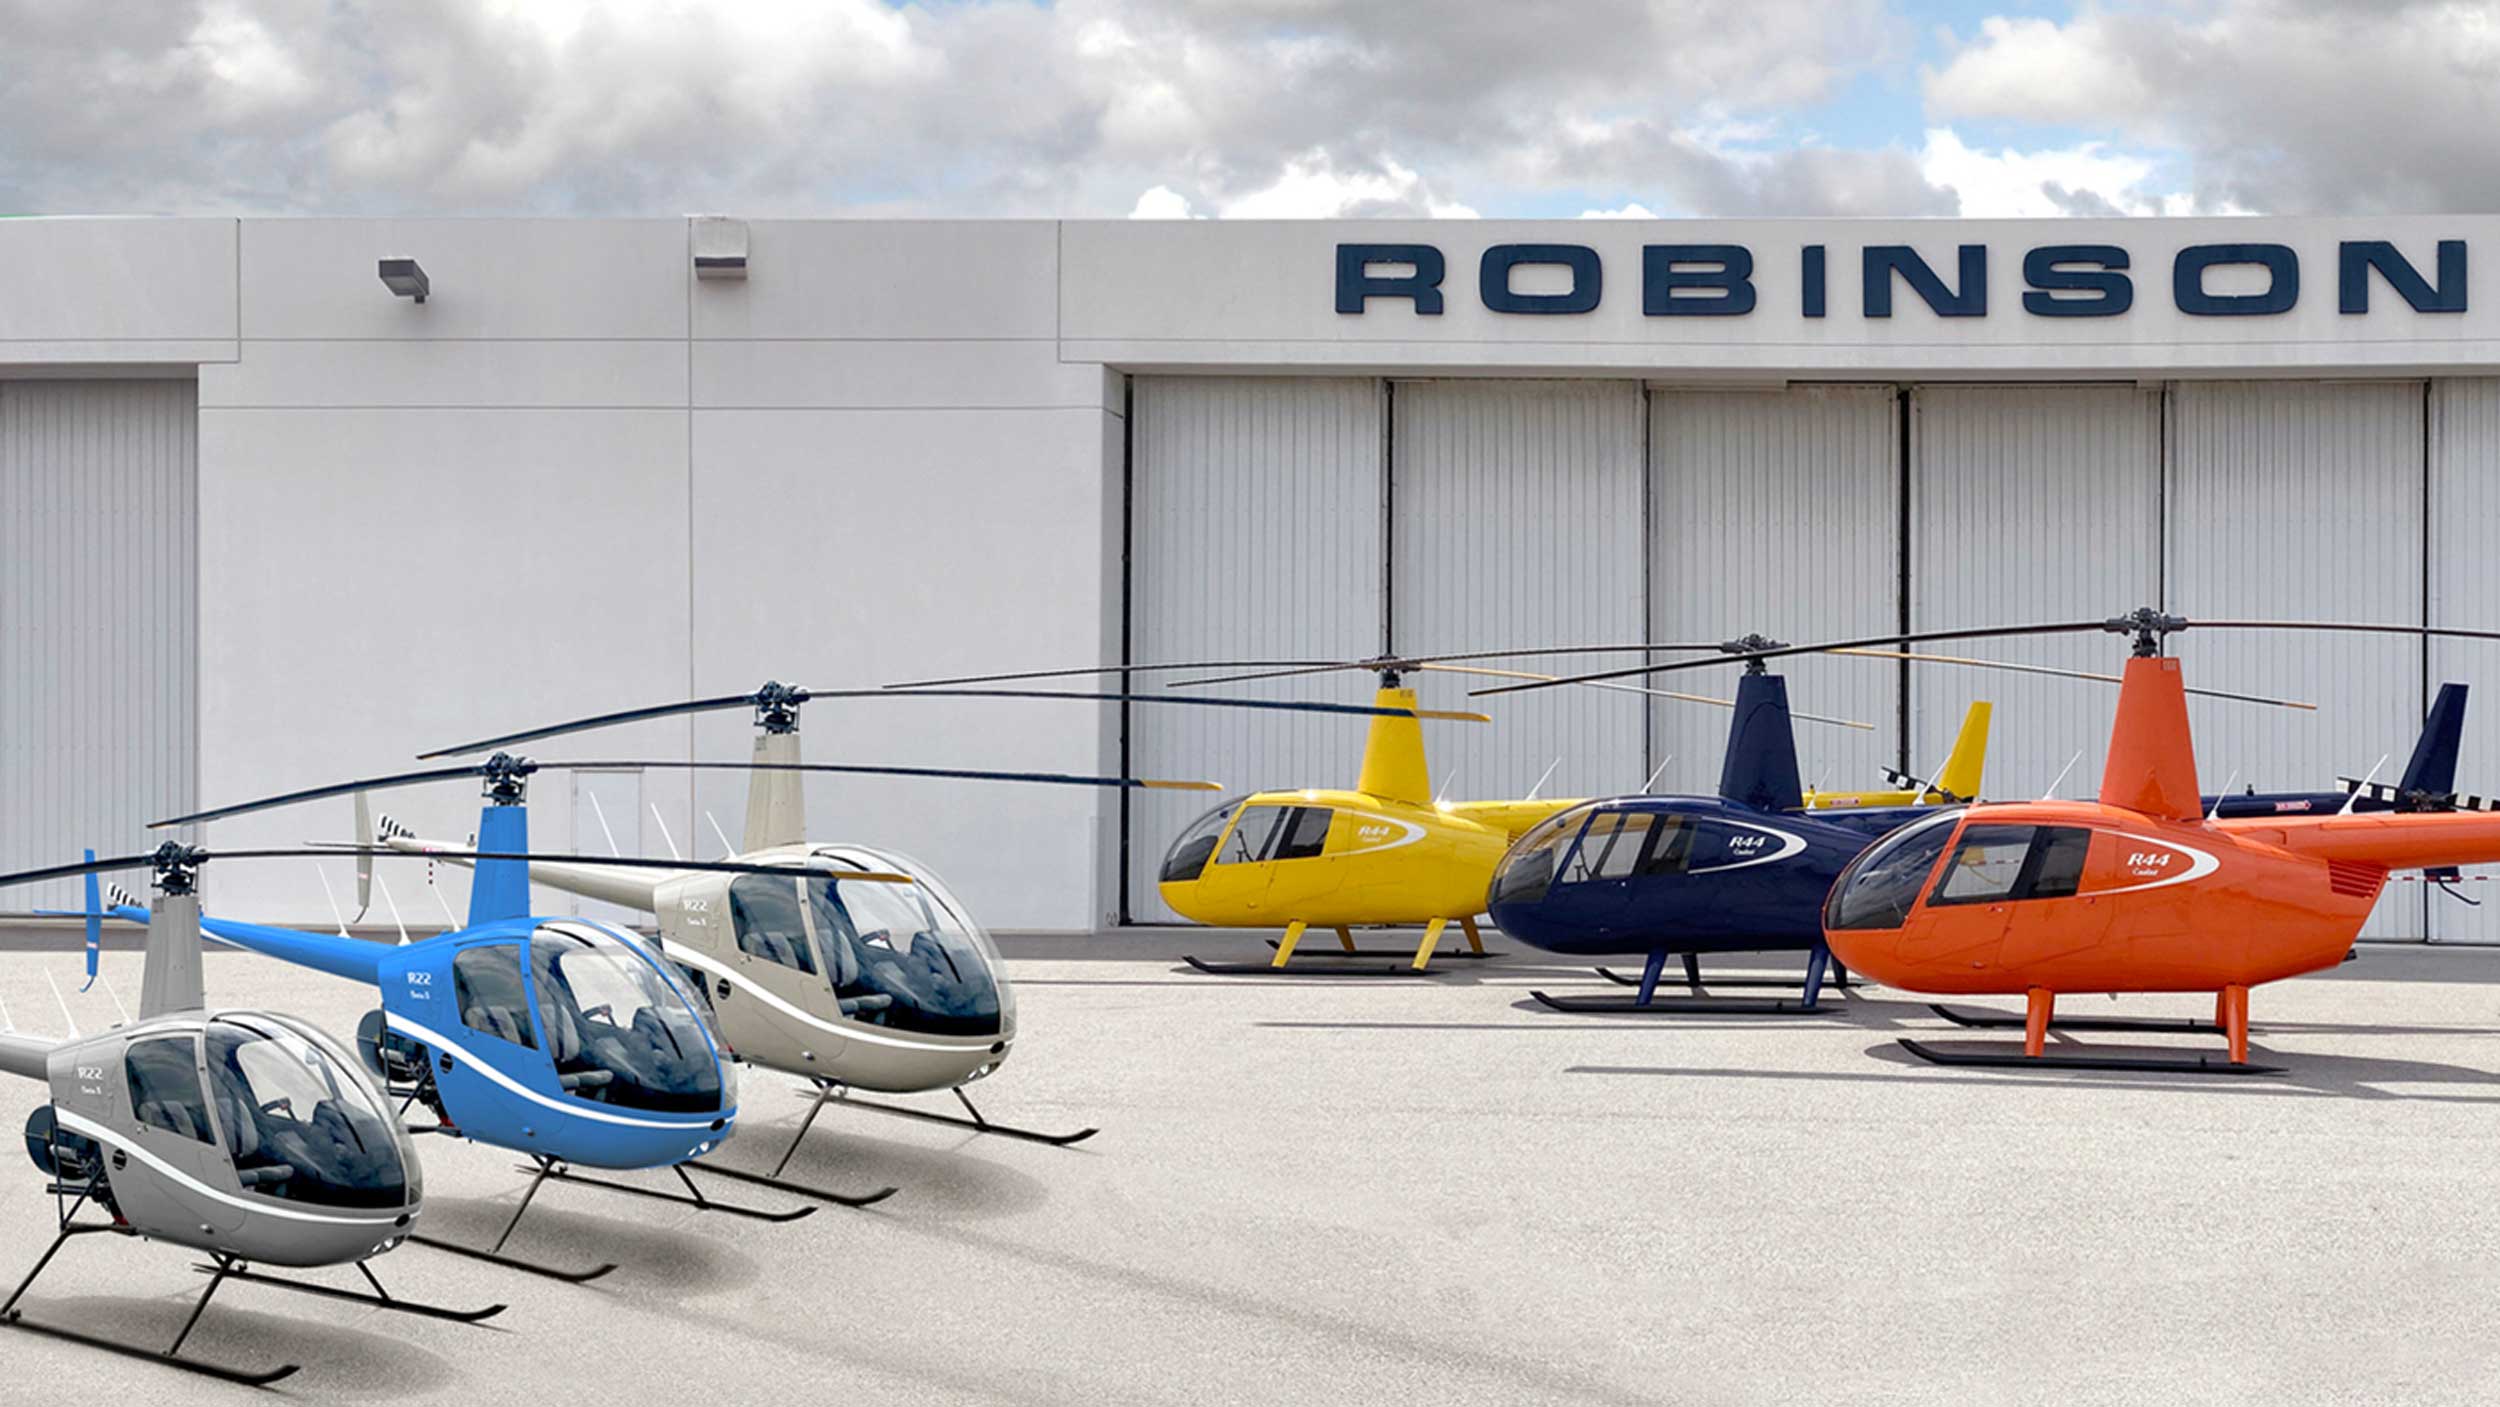 Frank Robinson, creator of R22, R44 and R66 helicopters, dies